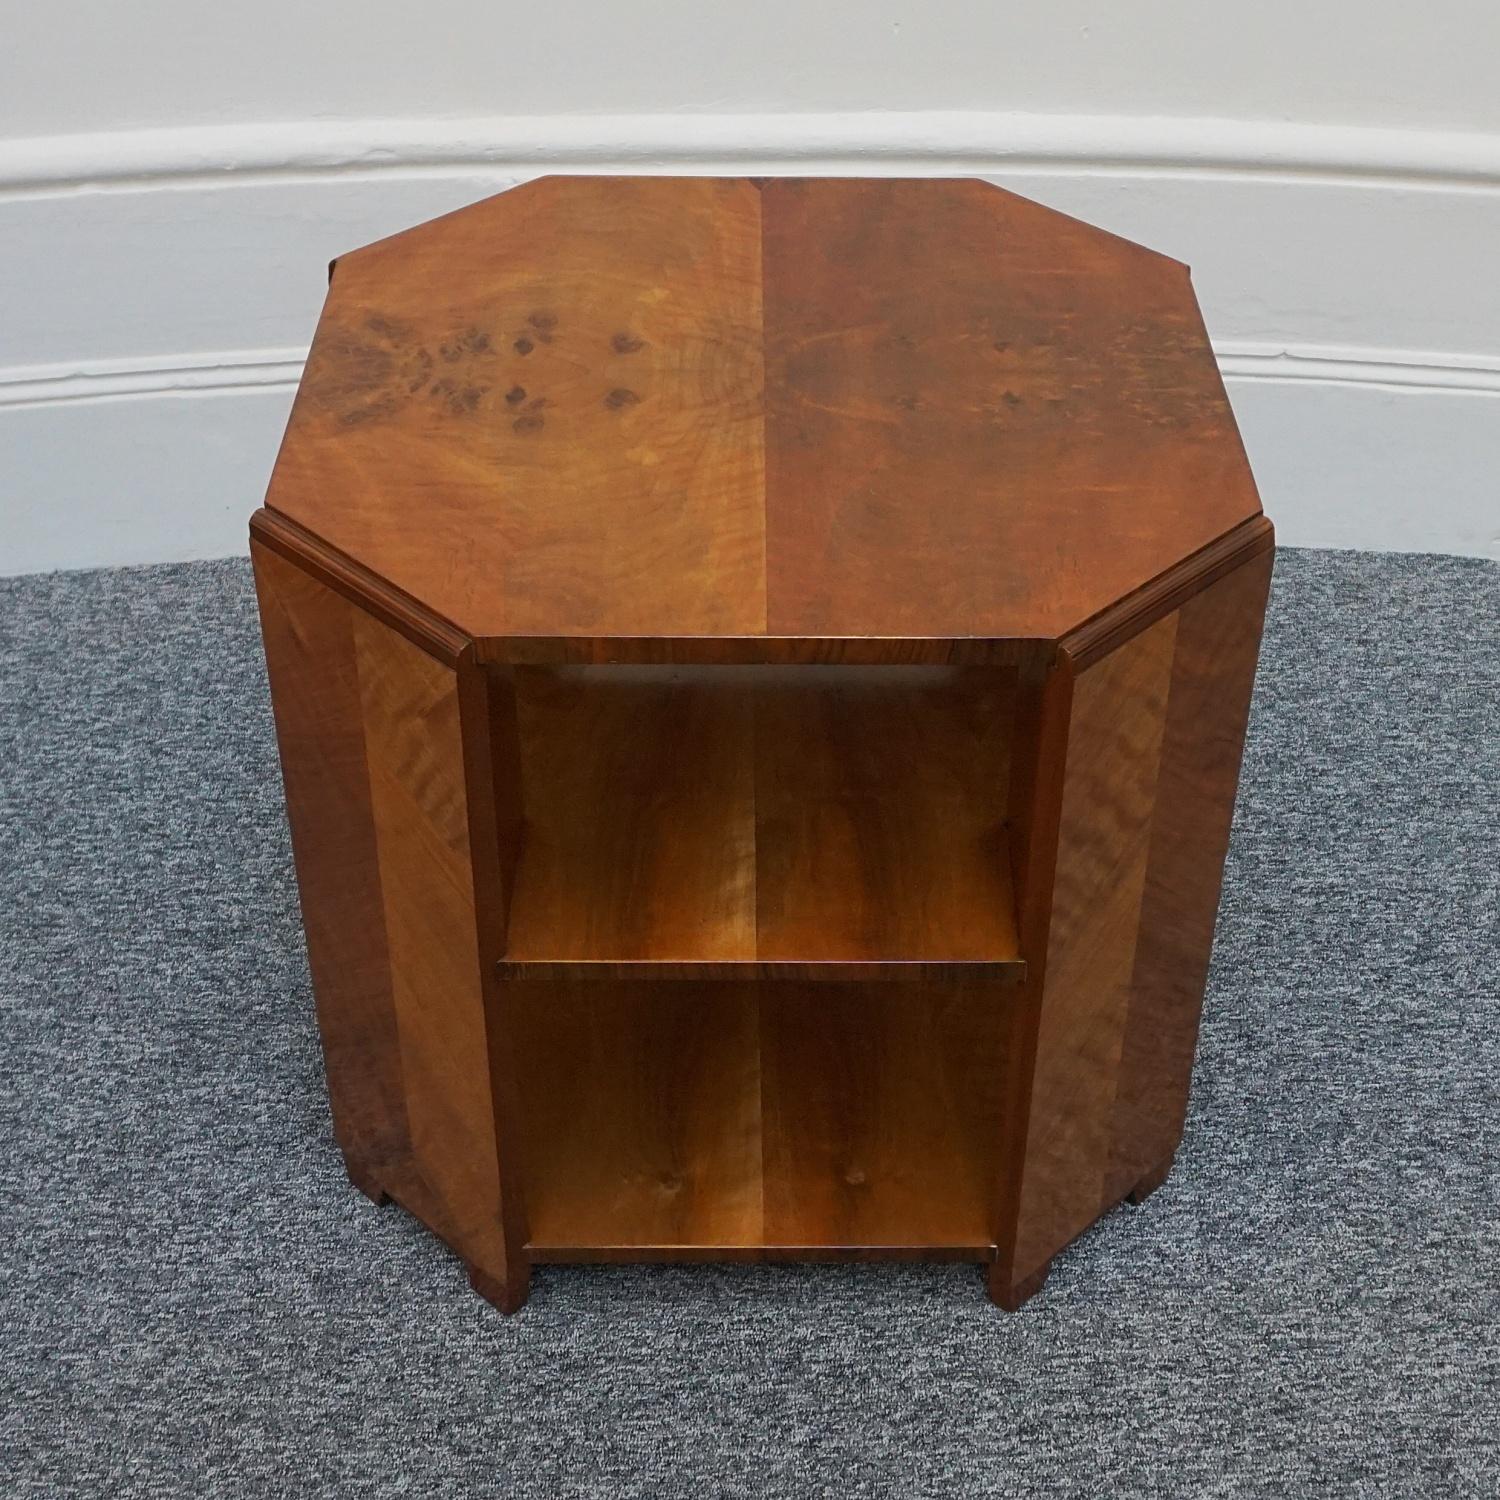 An Art Deco two tiered side table by Heal's of London. Burr and figured walnut veneer. Original Heal's stamp to underneath.

Dimensions: H 58cm W 59.5cm D 59.5cm

Origin: English

Date: Circa 1935

Founded by John Harris Heal 1810, Heal’s